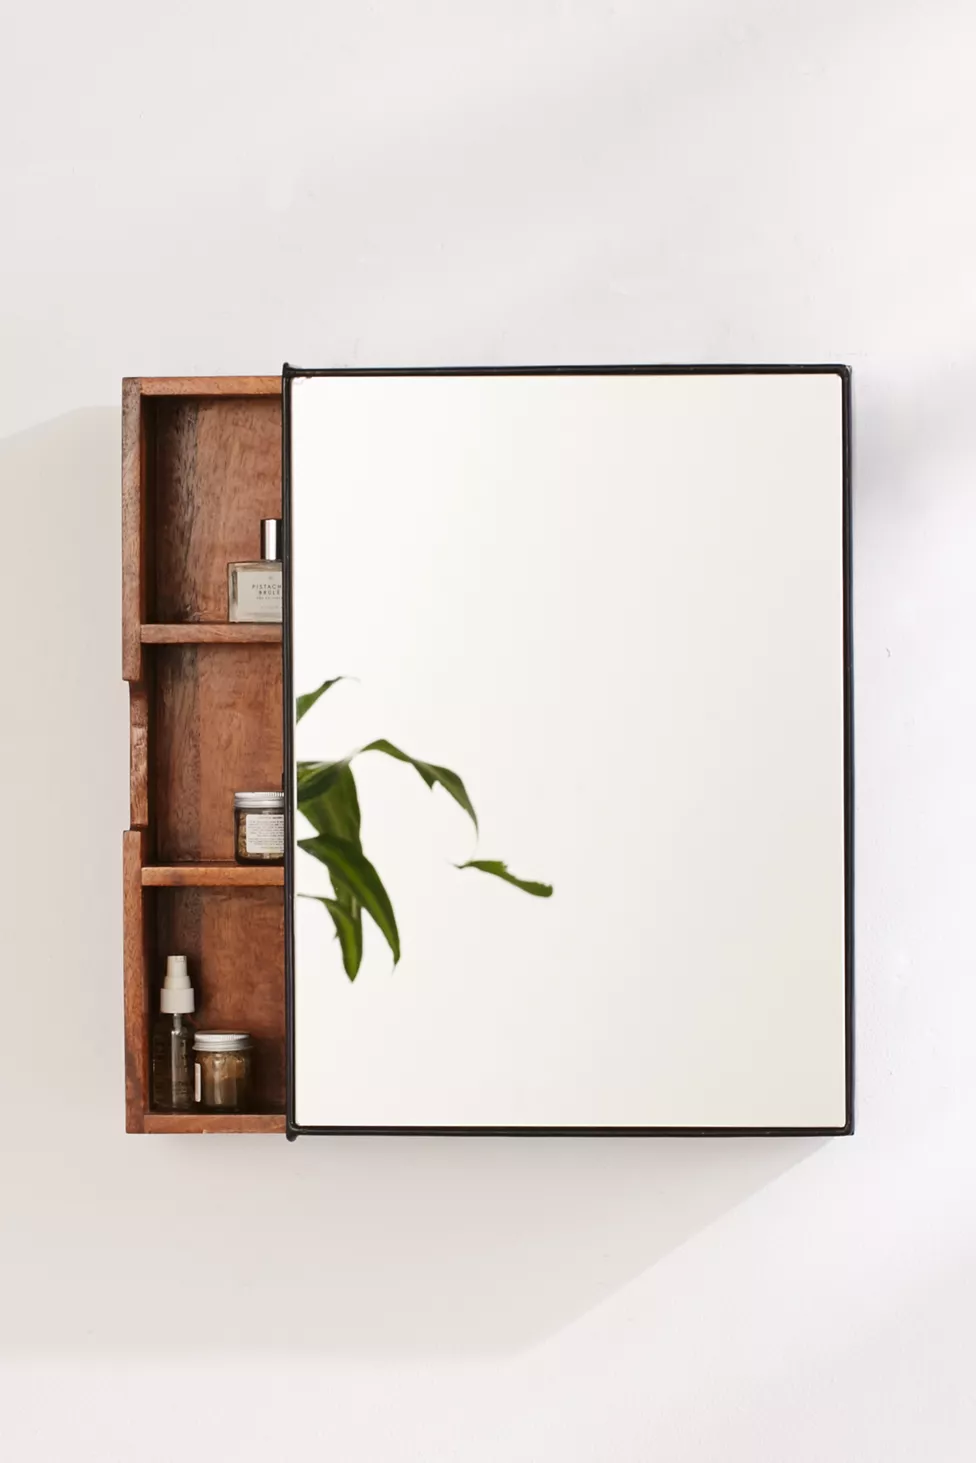 Shop Plymouth Sliding Storage Mirror from Urban Outfitters on Openhaus